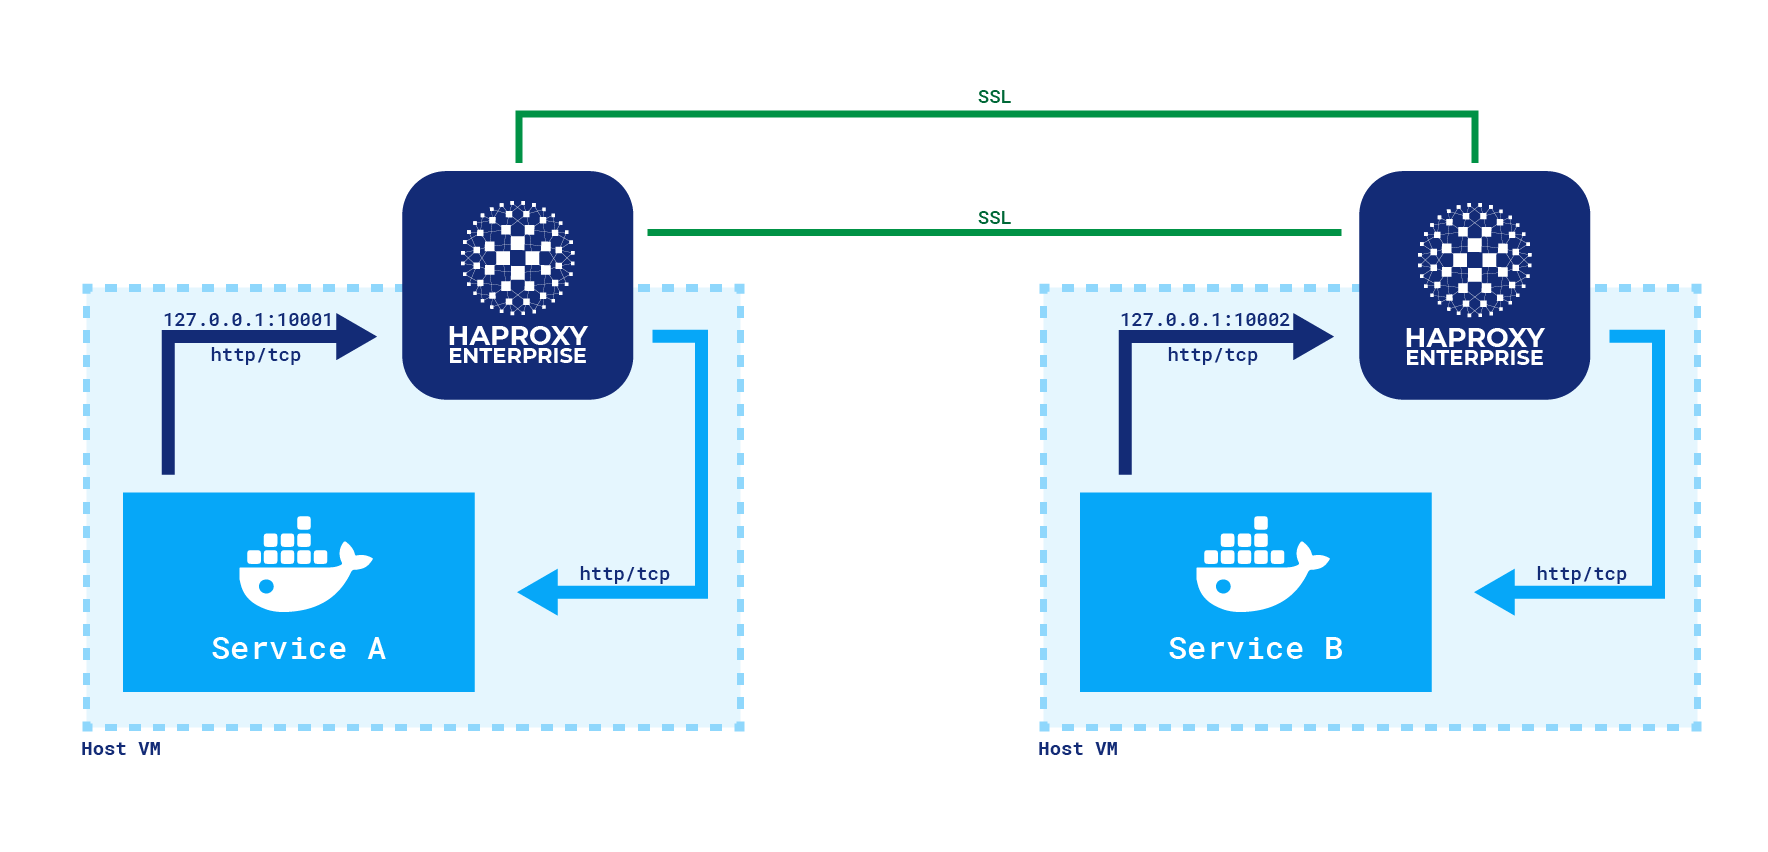 yammer-haproxy-simplified-2